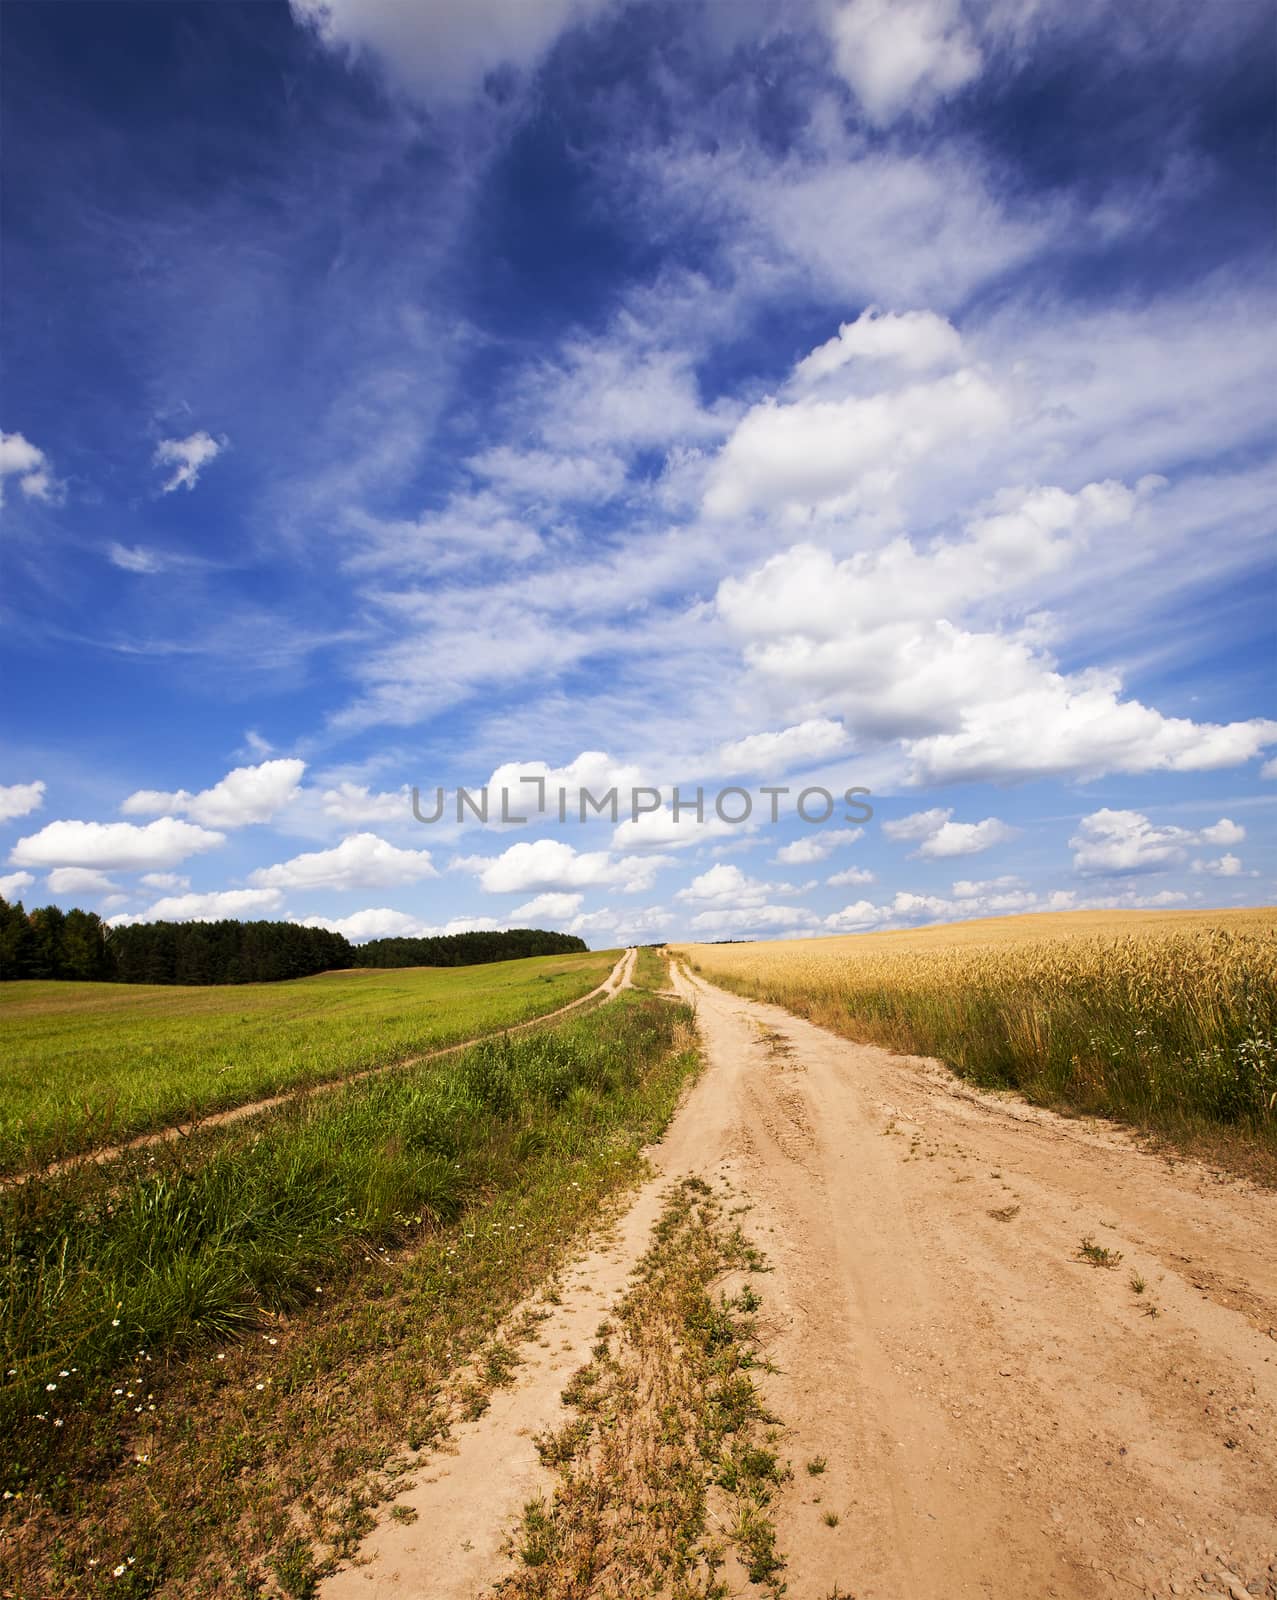  rural road in the summer time year